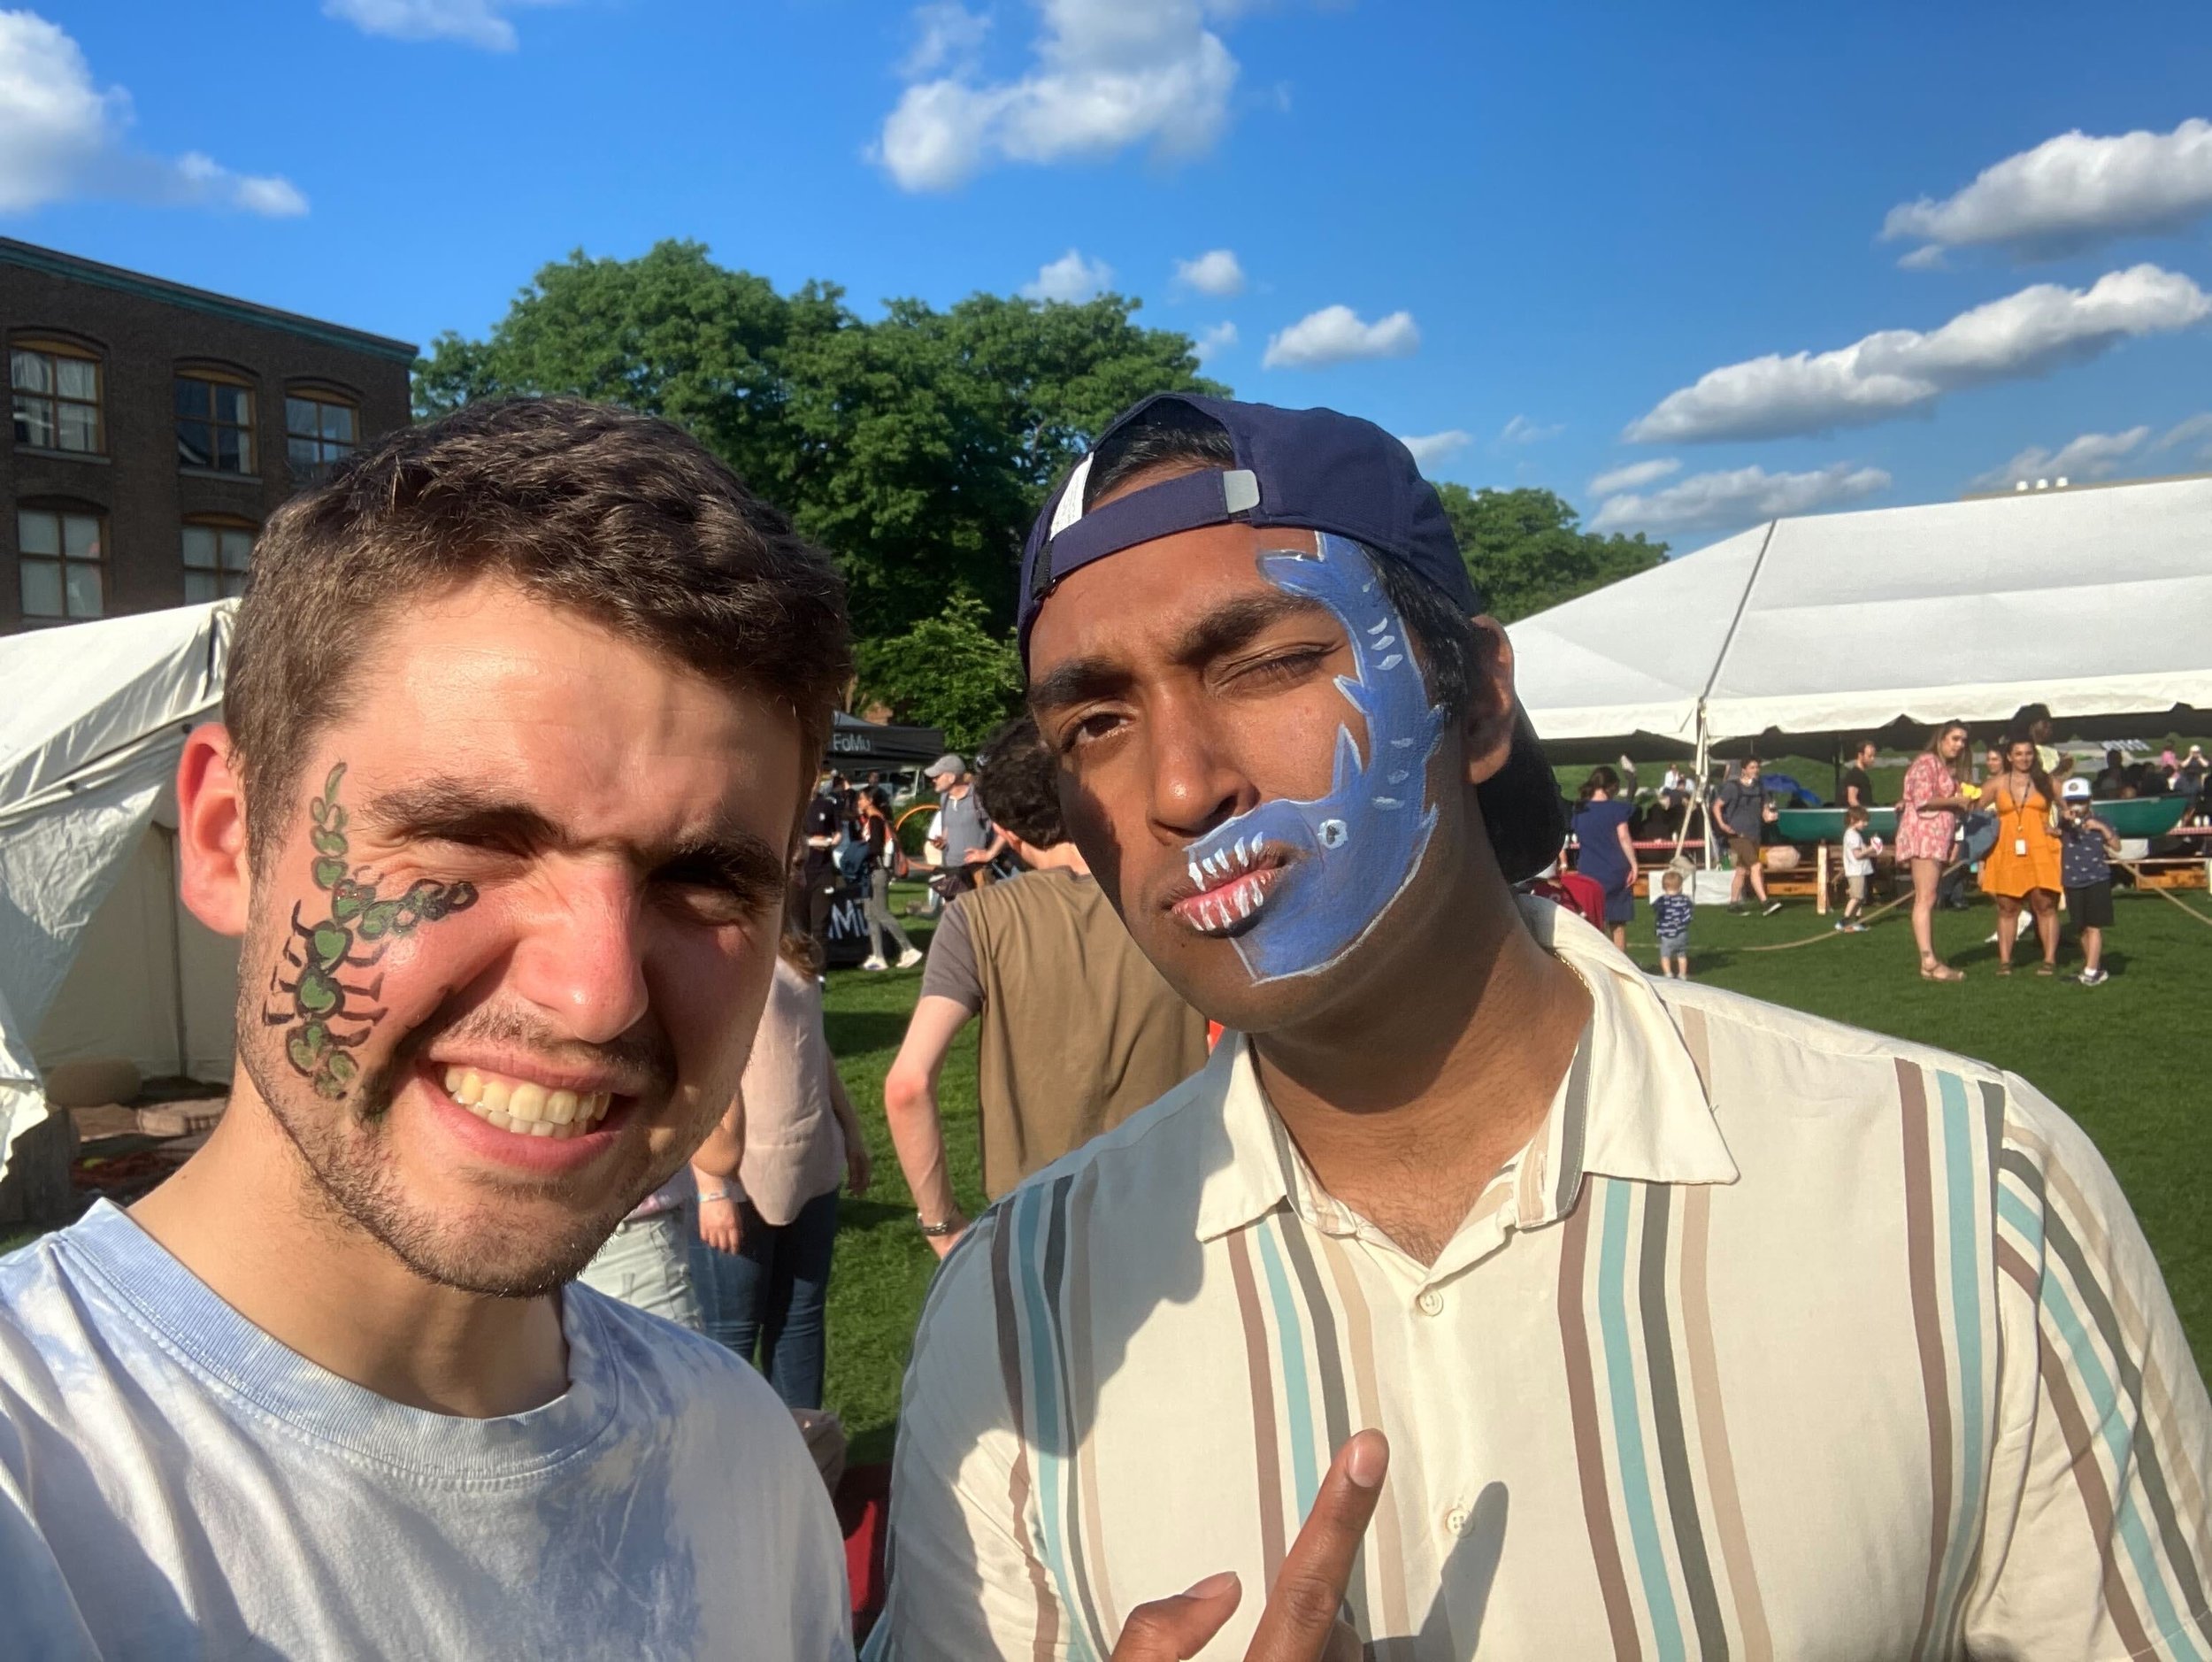 Face painting at Broad summer festival